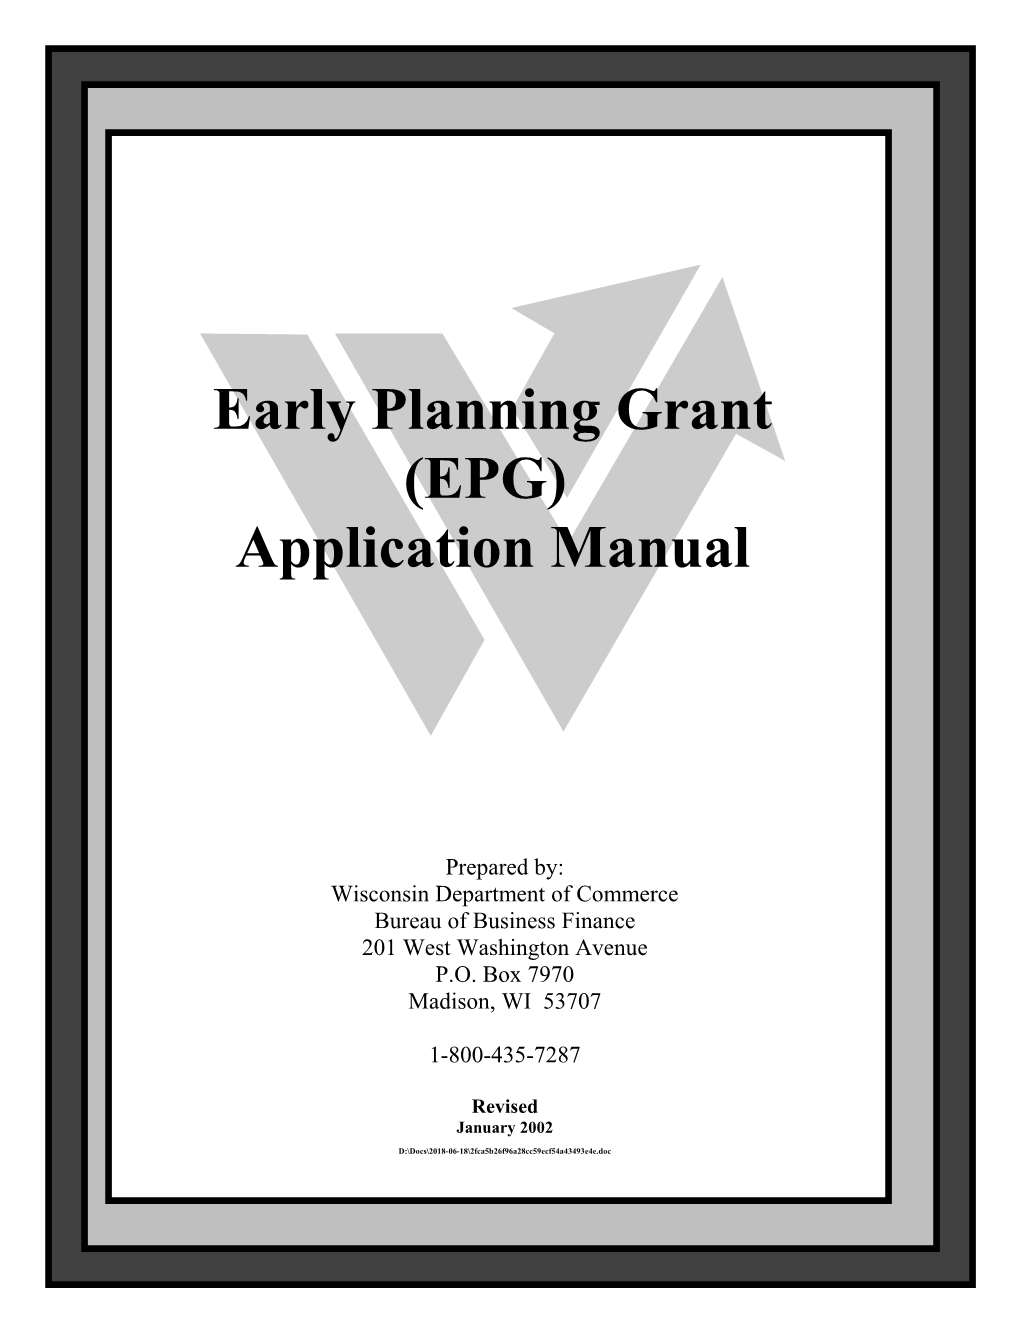 The Early Planning Grant (EPG) Program Is Designed to Help Individual Entrepreneurs And